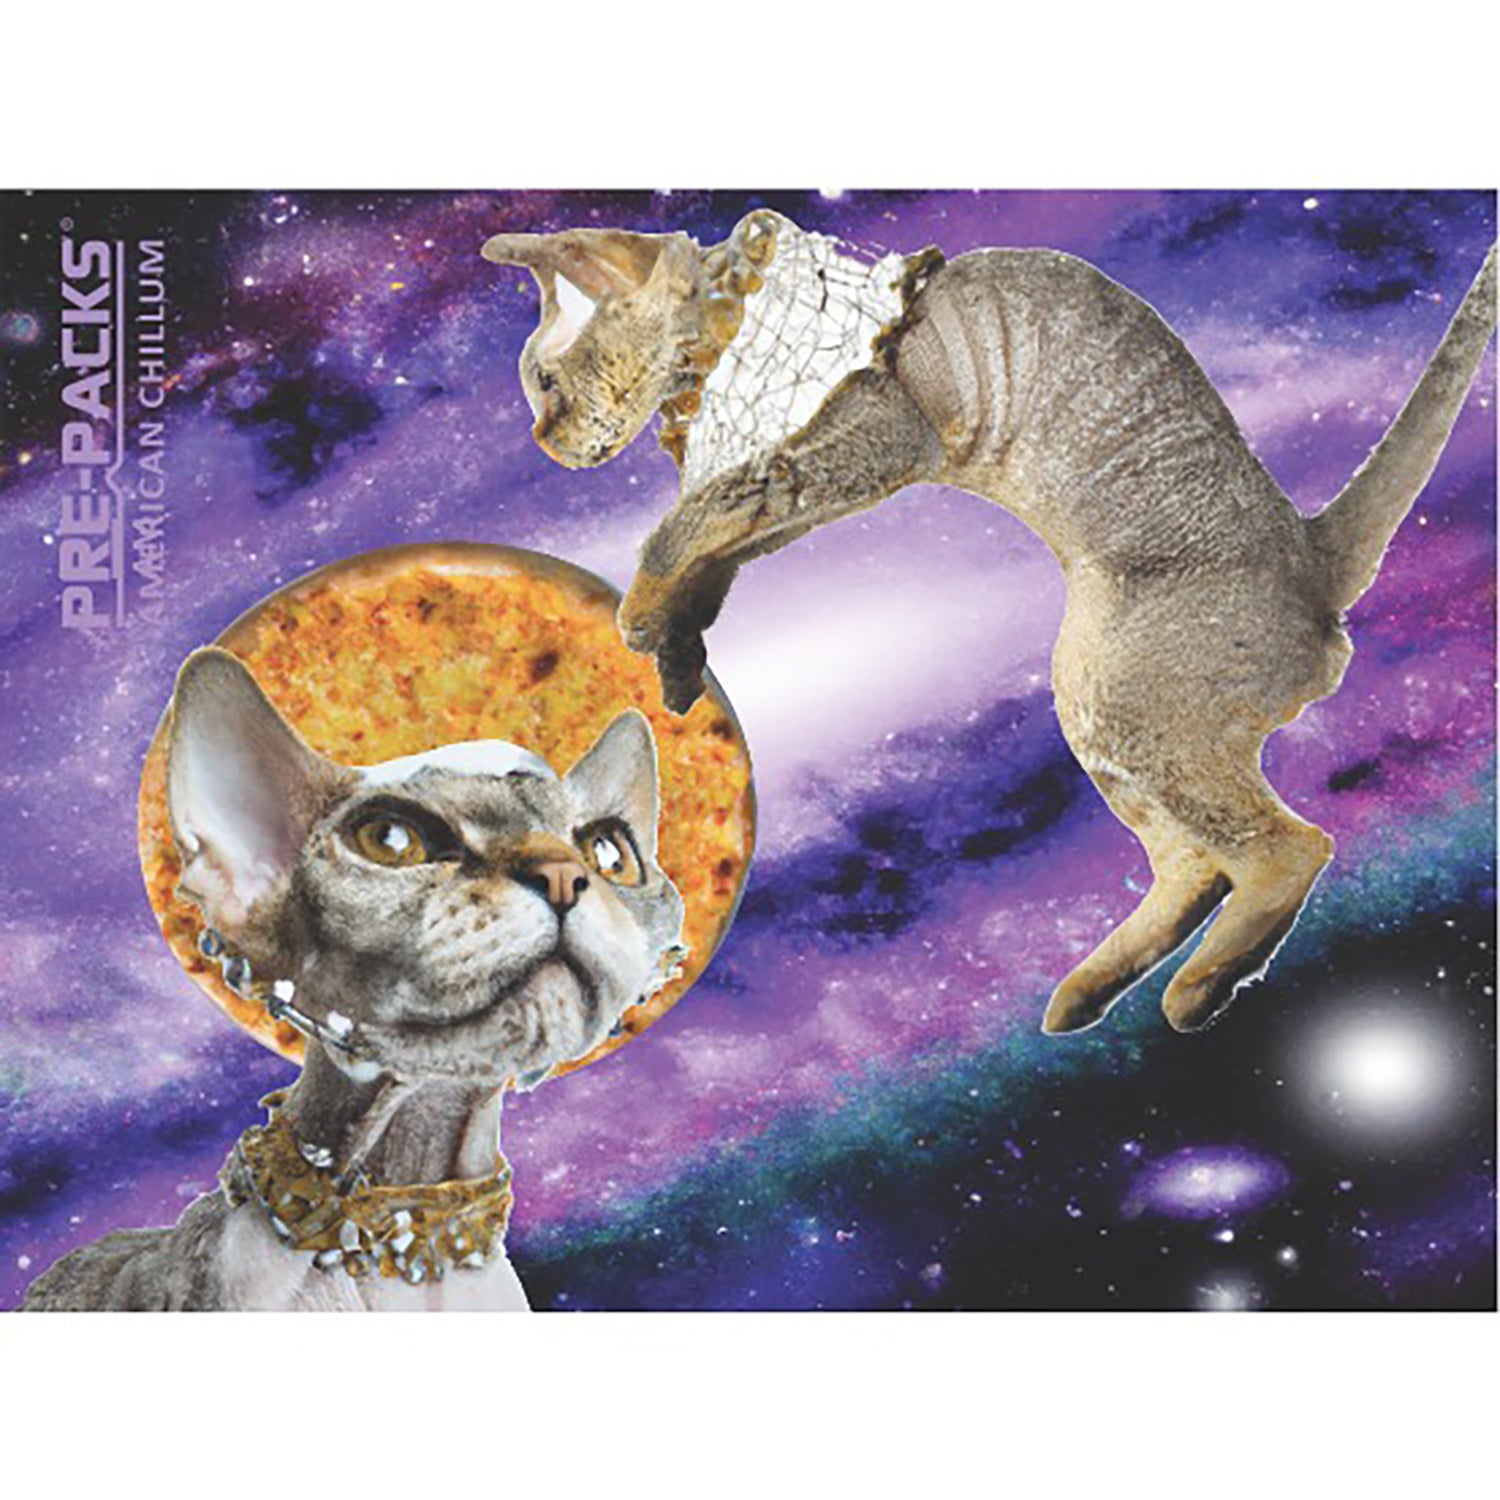 Space Explorer Hairless Cats Animal Pre-Made Design Chillums